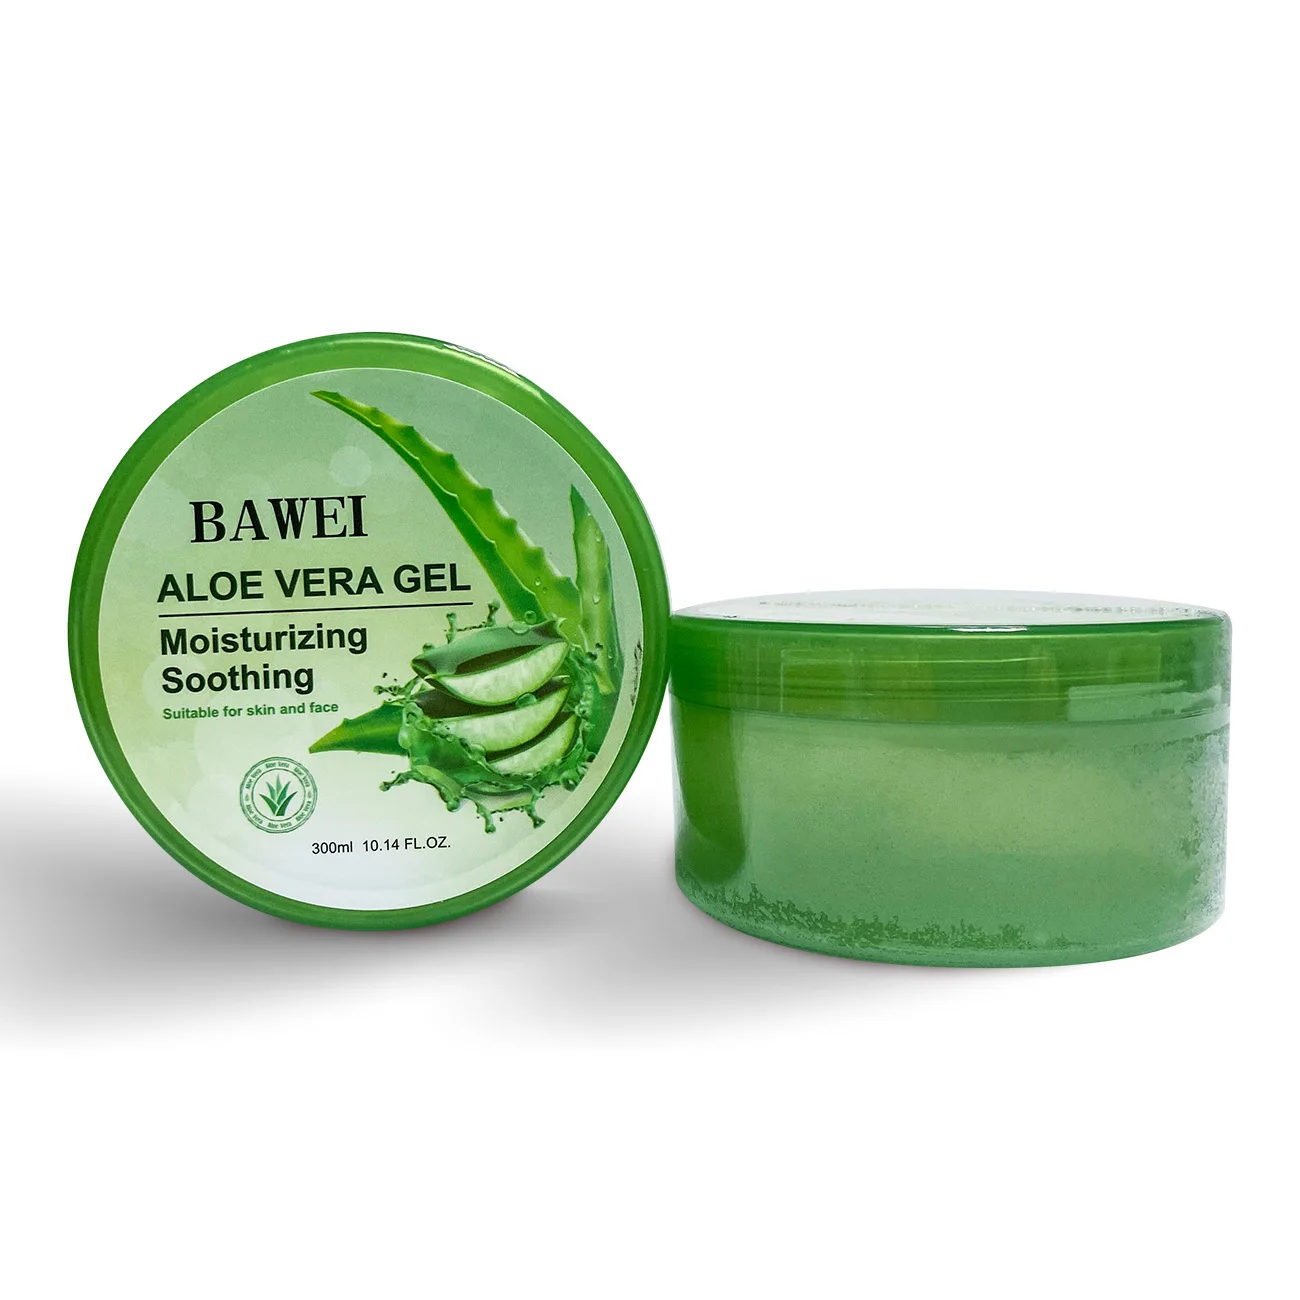 100% Pure Aloe Vera Gel For Face Wash And Body After Sun - Buy Aloe Vera,Pure Aloe Vera Gel 100% Natural,Moisture Aloe Face Wash Product on Alibaba.com